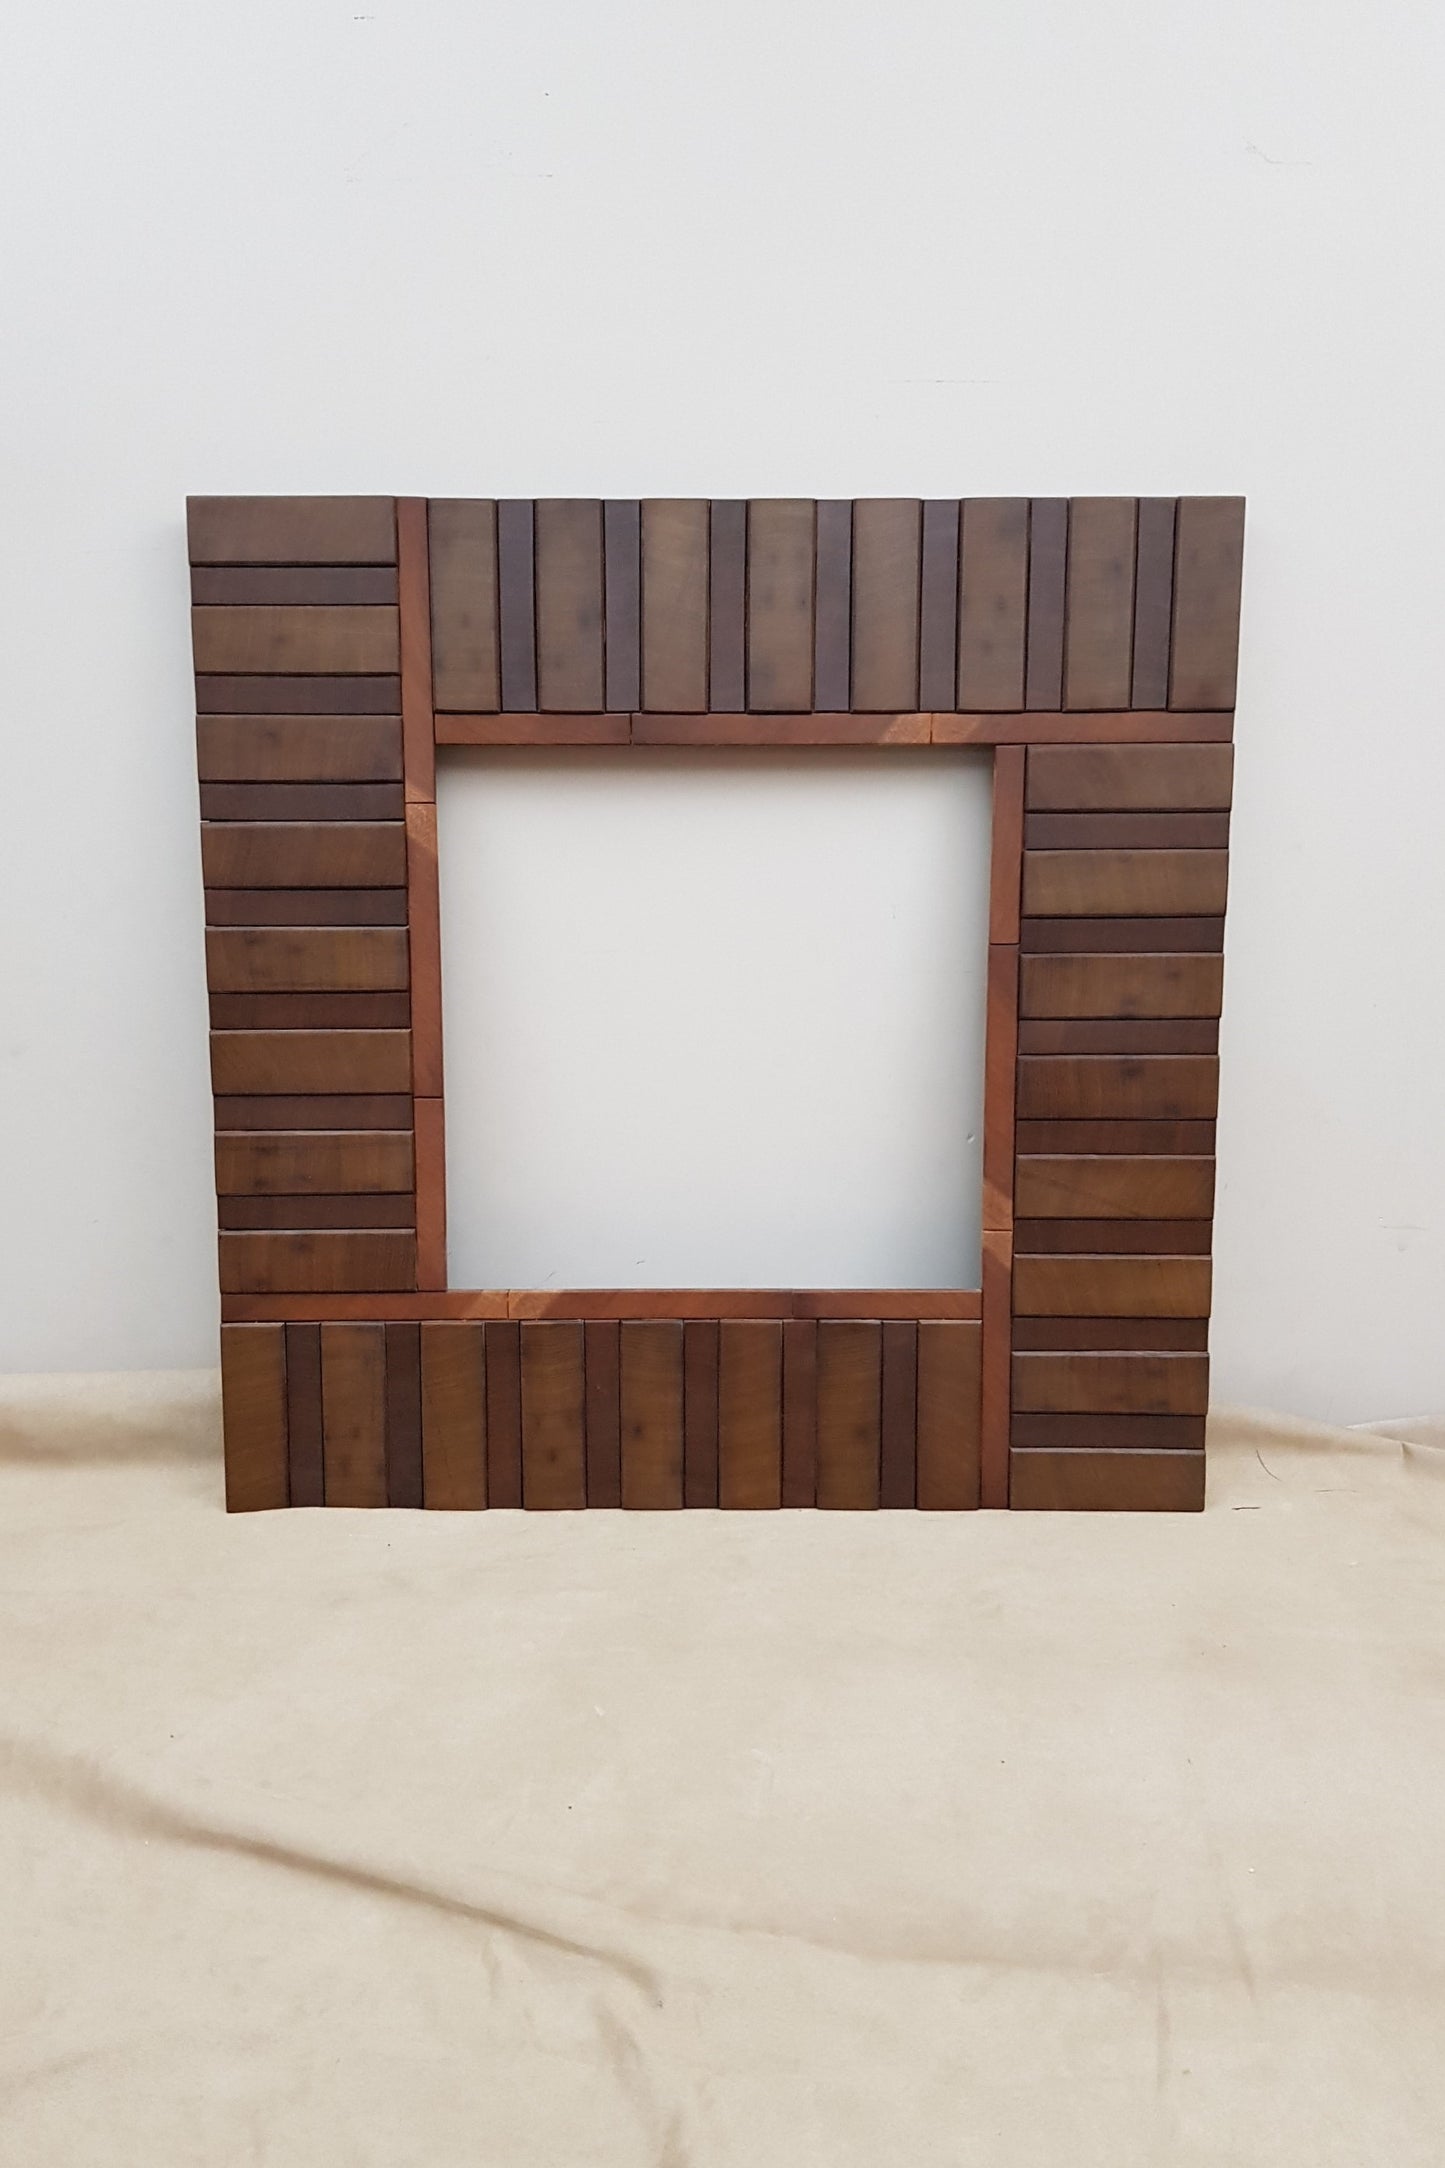 Square wooden mirror frame in end grain mahogany.